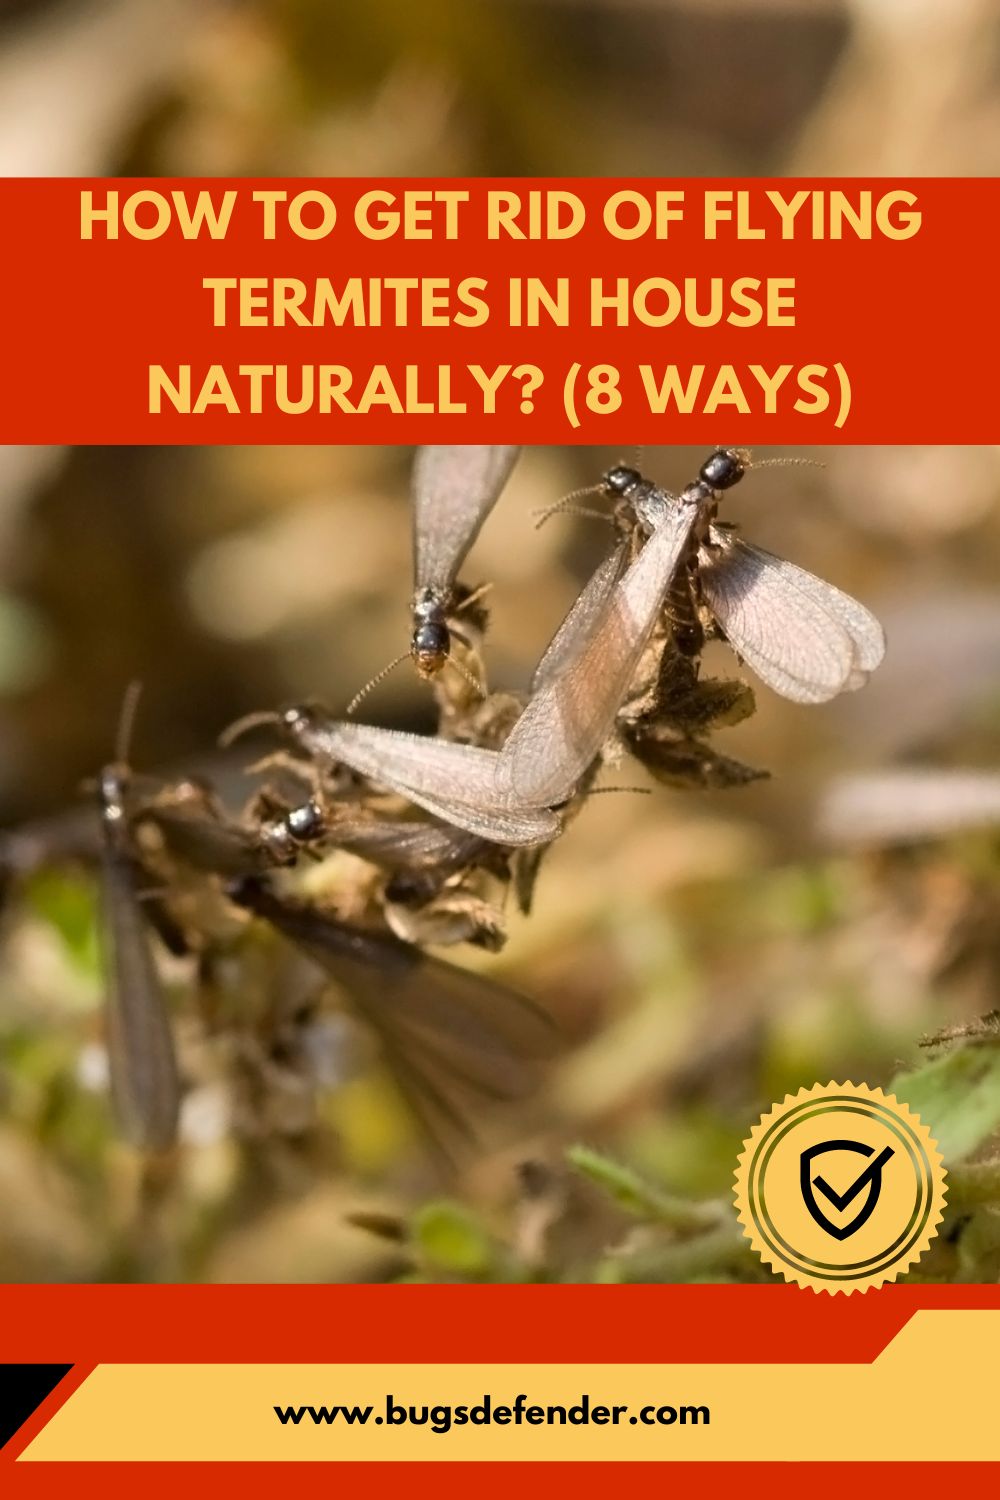 How To Get Rid Of Flying Termites In House Naturally? (8 Ways) pin2